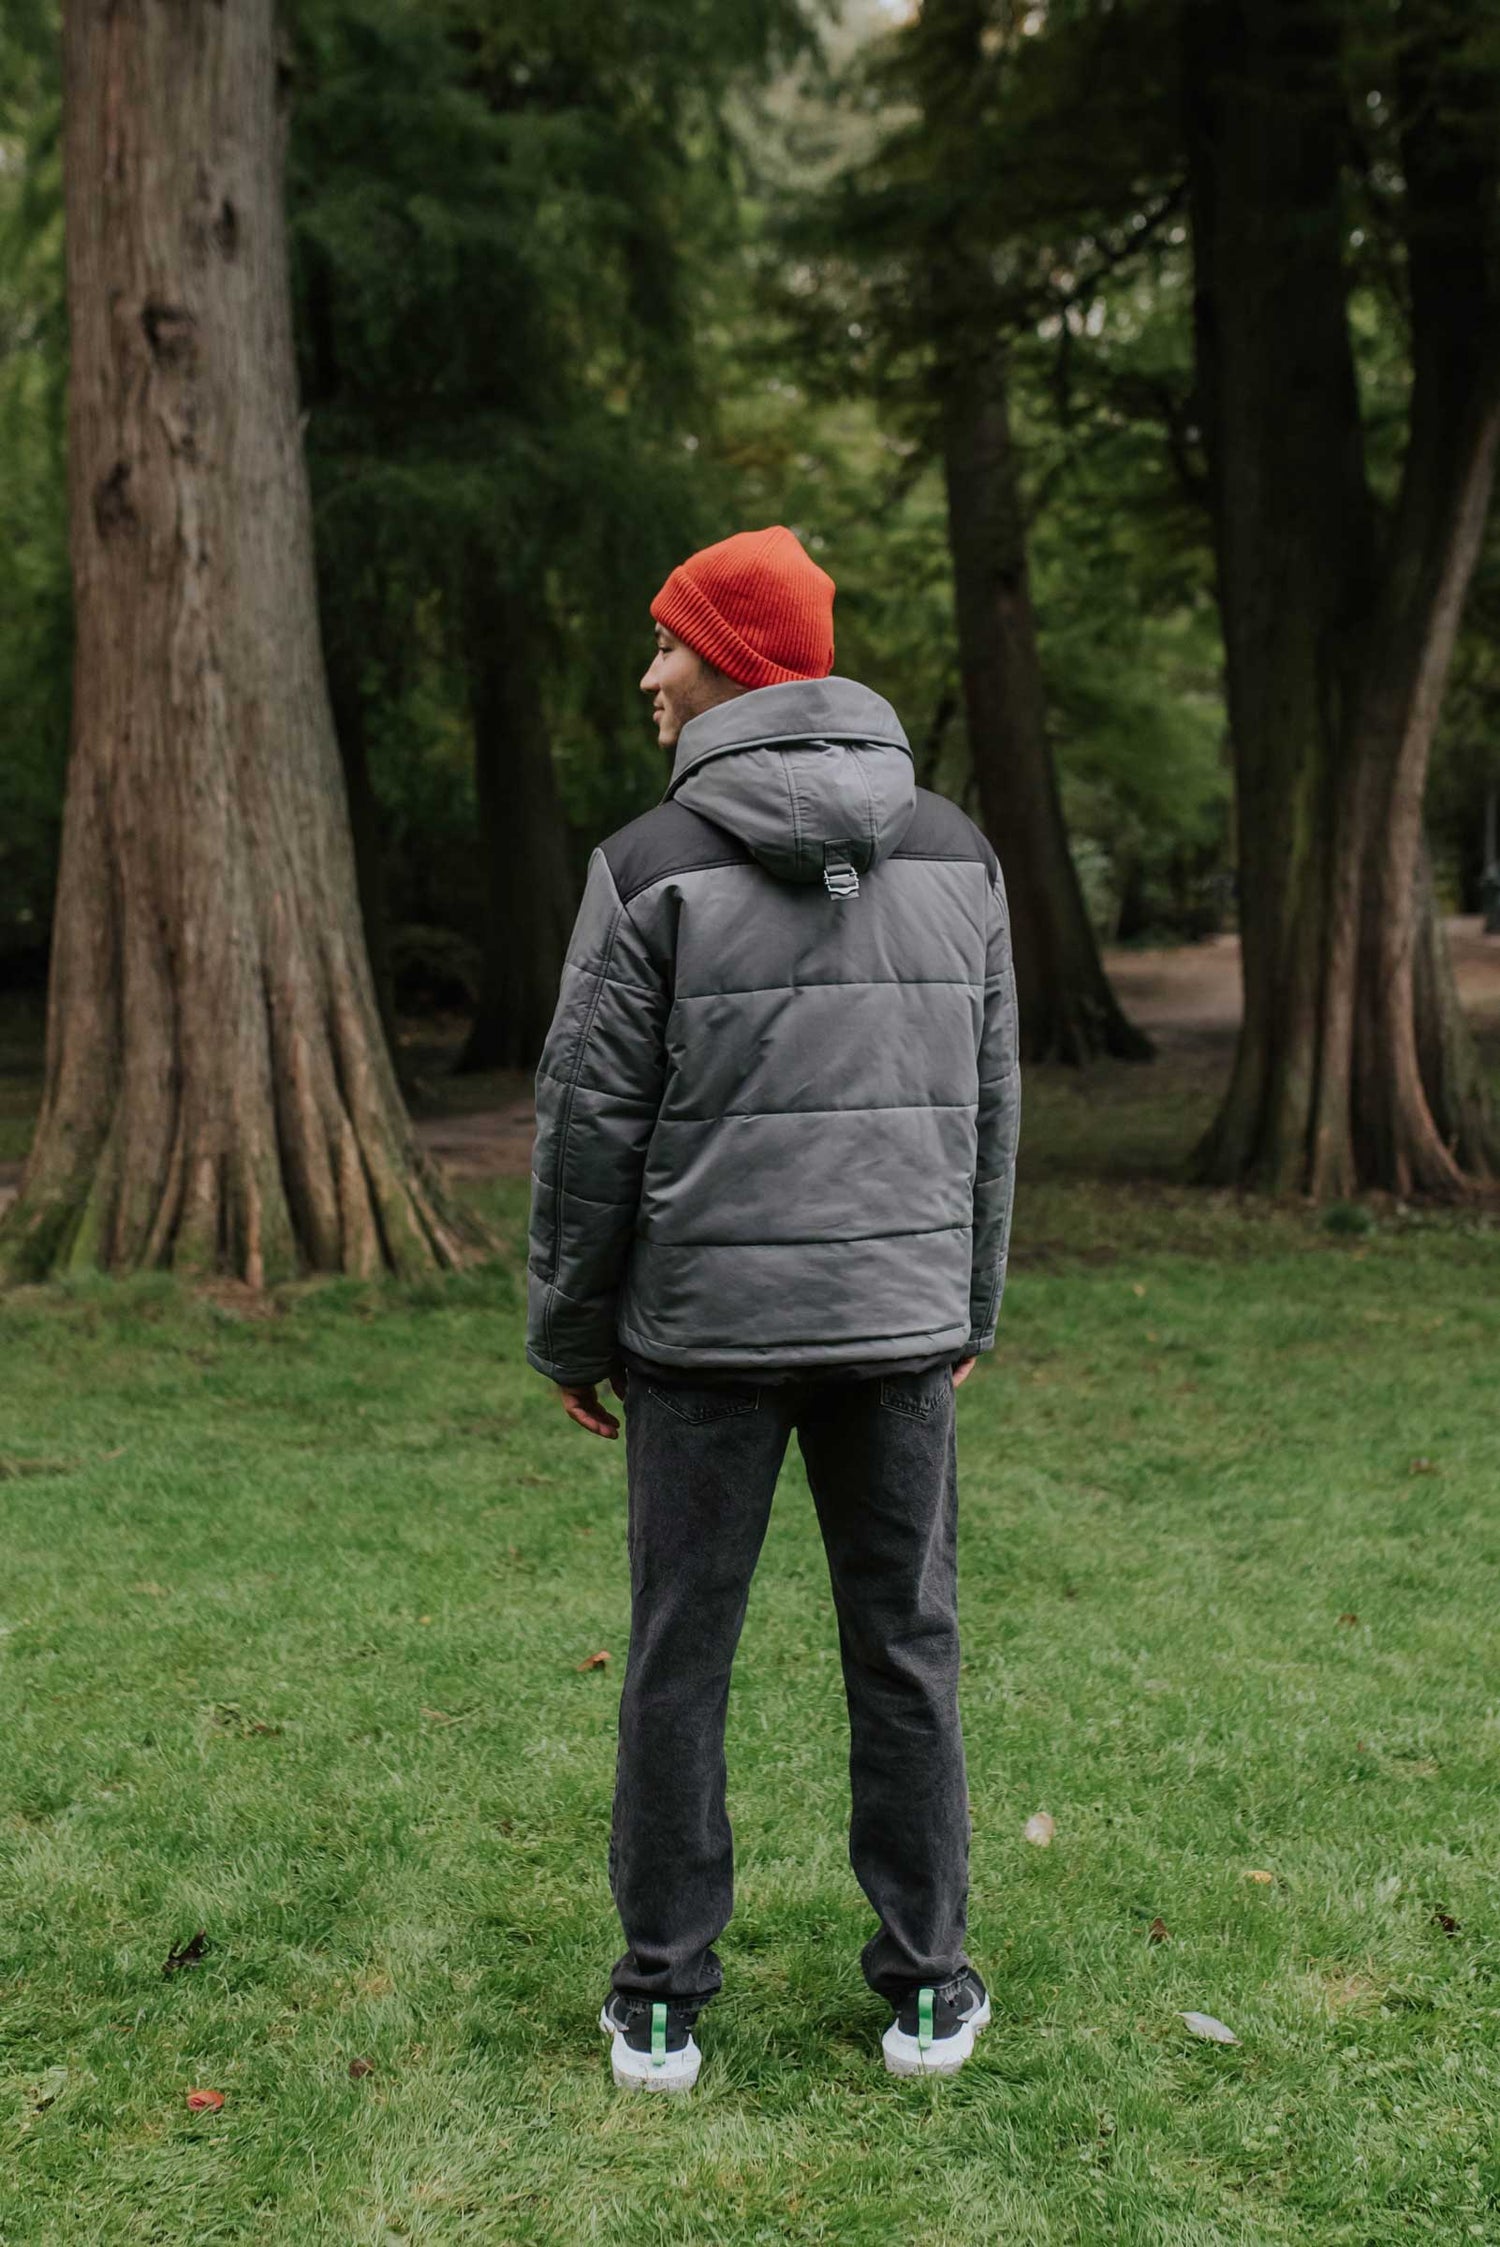 All weather proof sustainable hemp winter jacket, with an adjustable hood, ribbed knit cuffs with thumbholes and zipper windguard to keep the elements out. The soft vegan padding is made from 100% certified recycled plastic bottles, by the innovative Repreve® - Back View